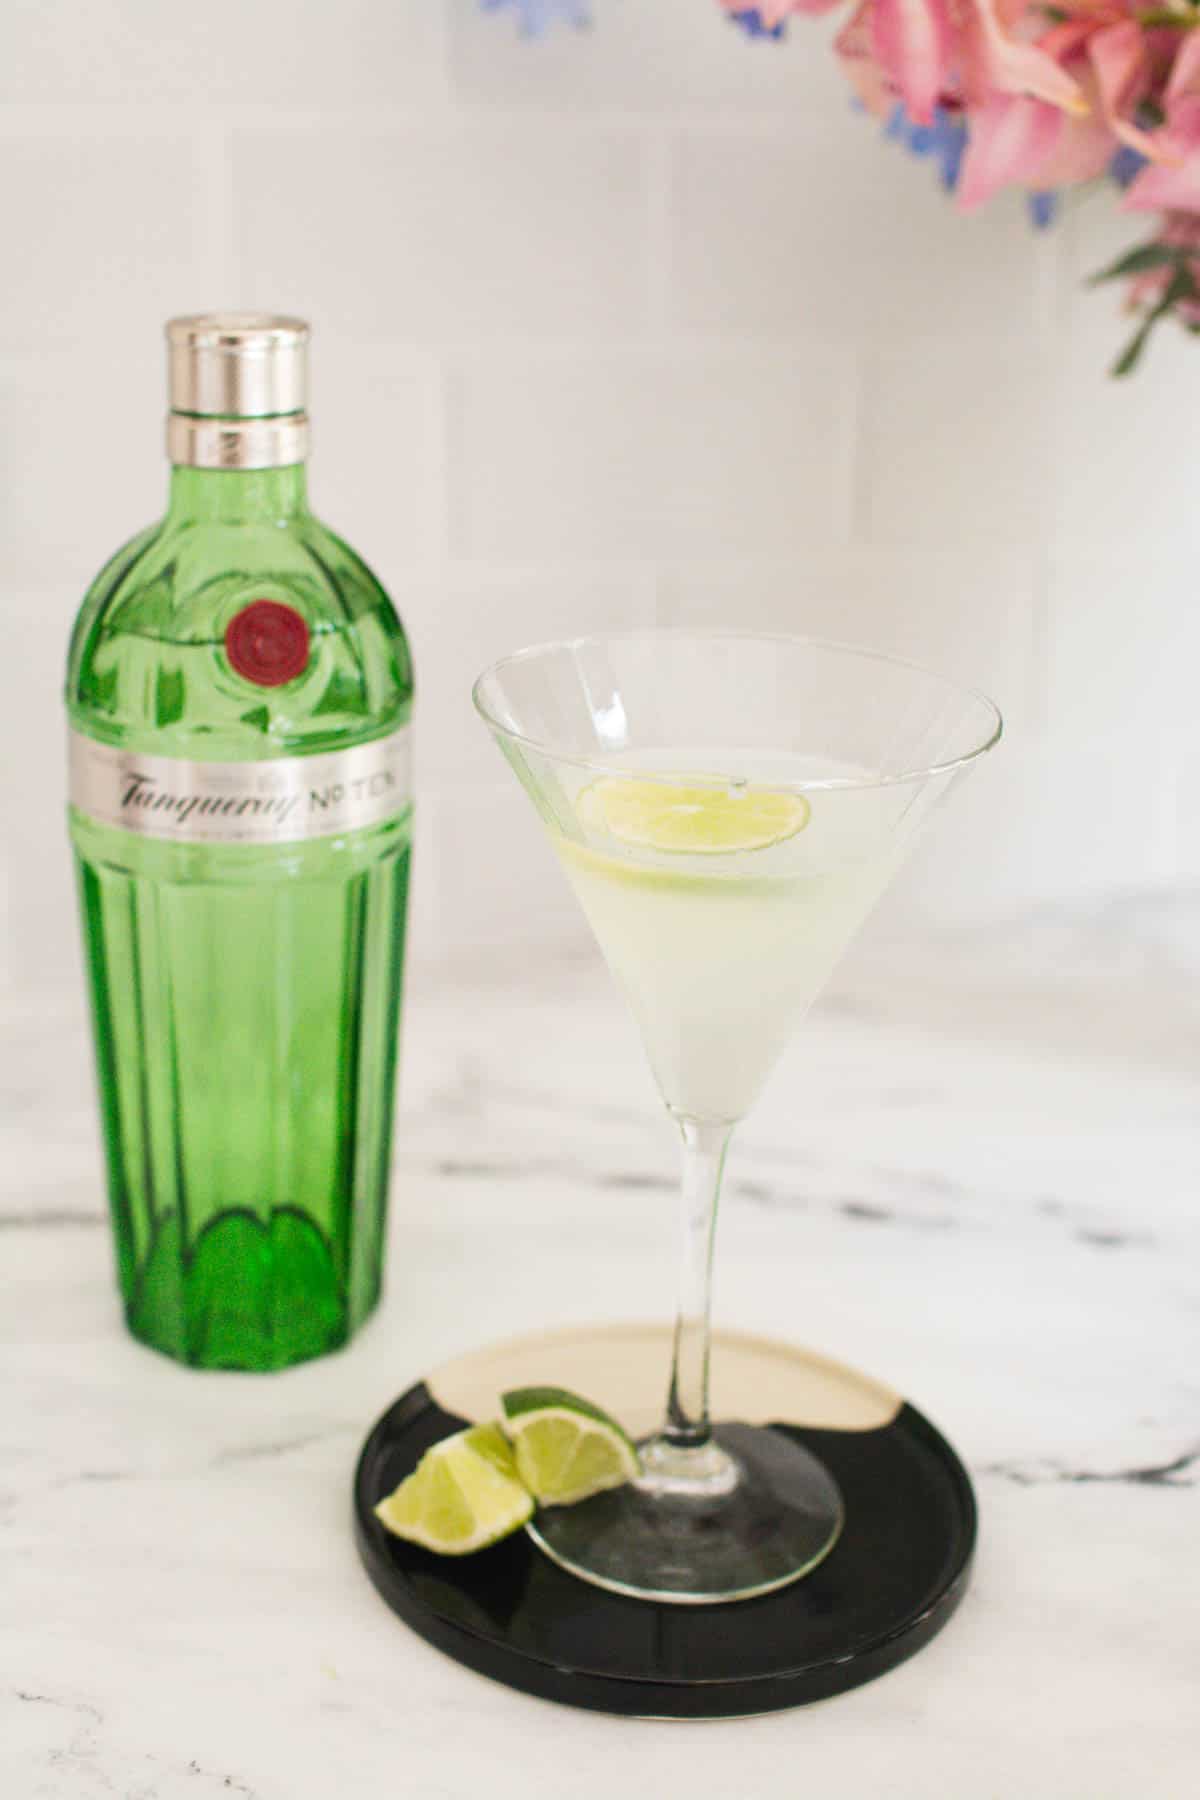 Gimlet in a martini glass next to a bottle of gin.